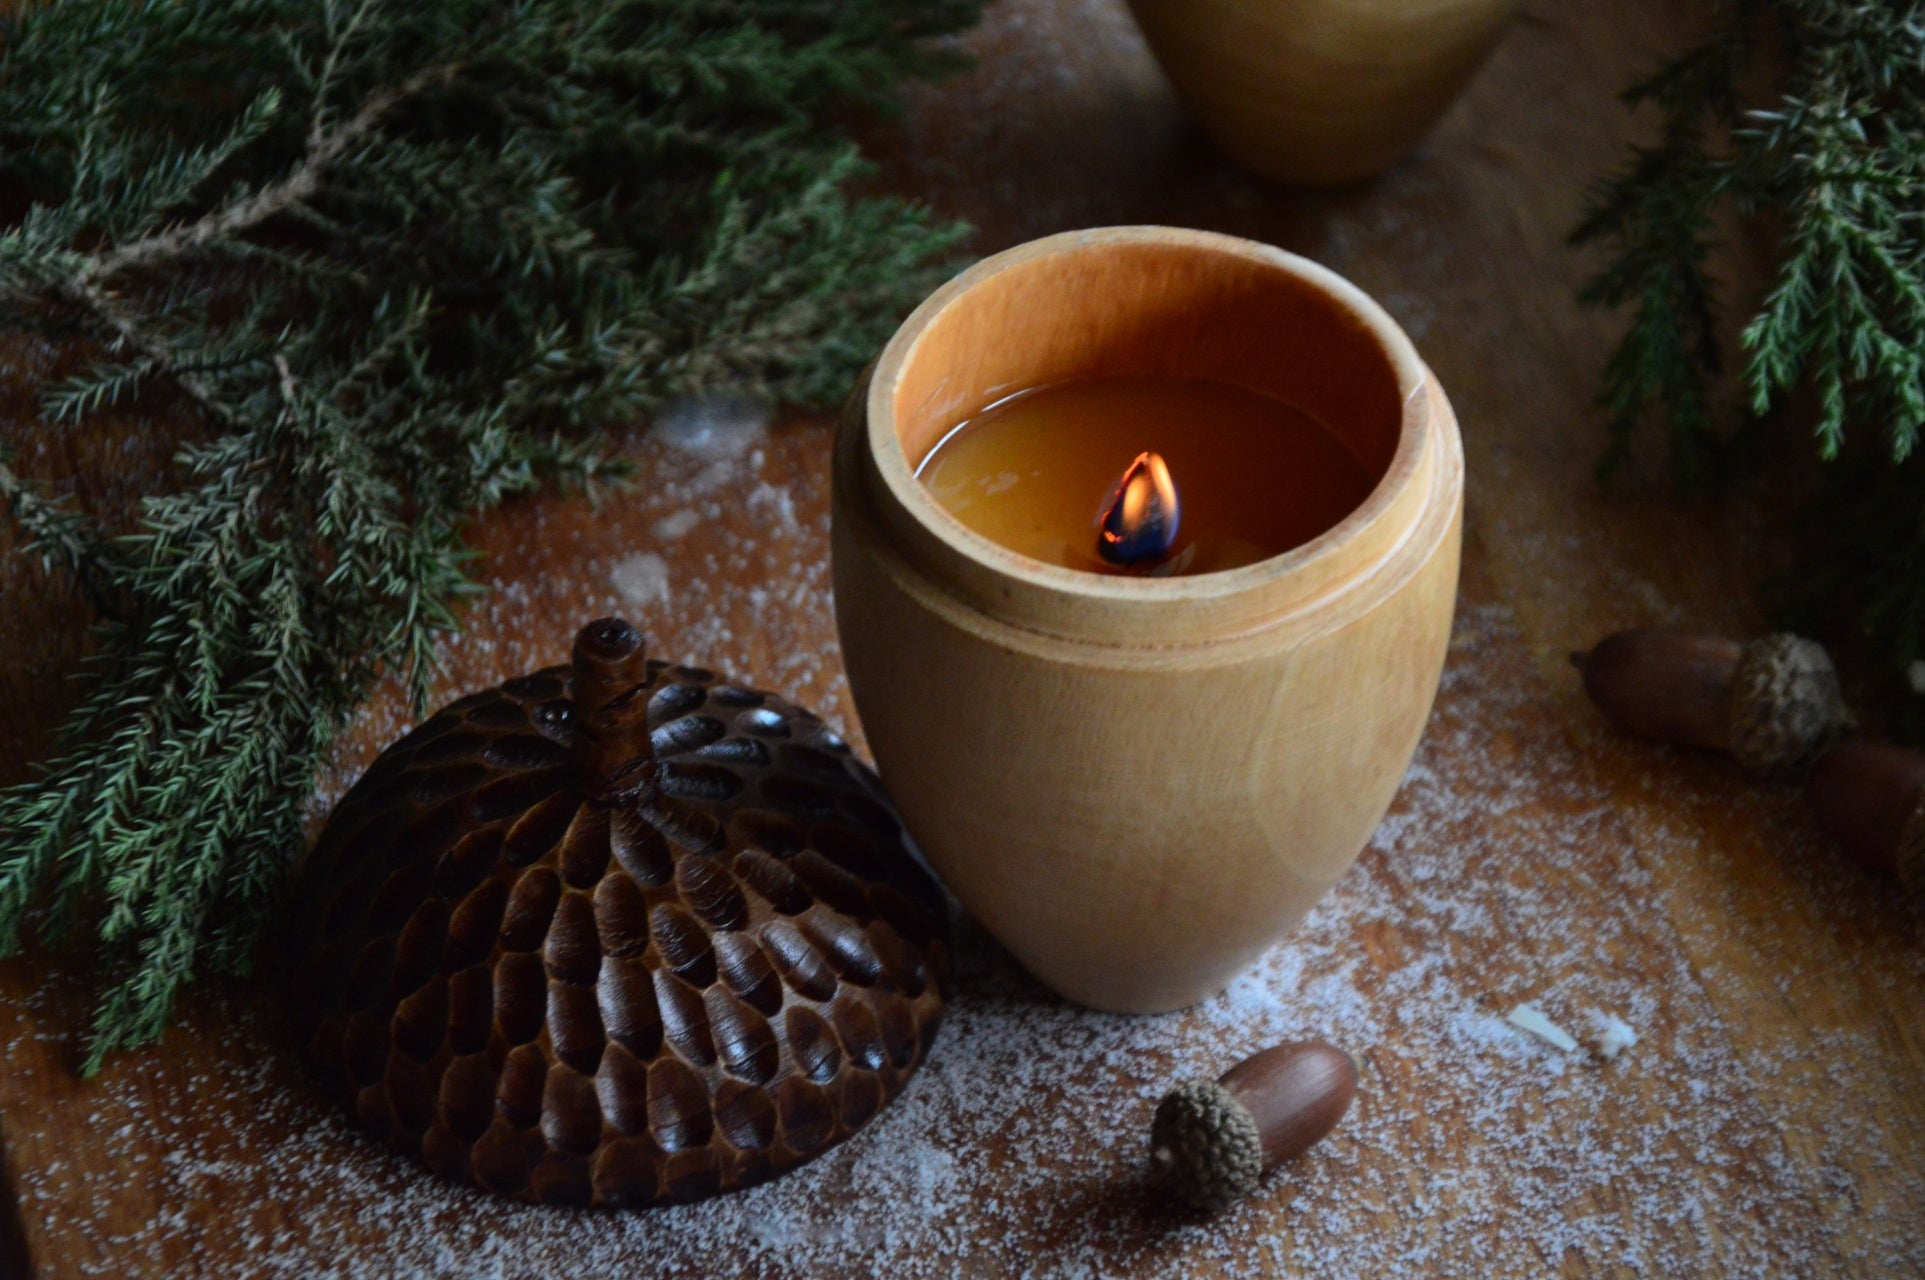 Acorn Wooden Candle Container